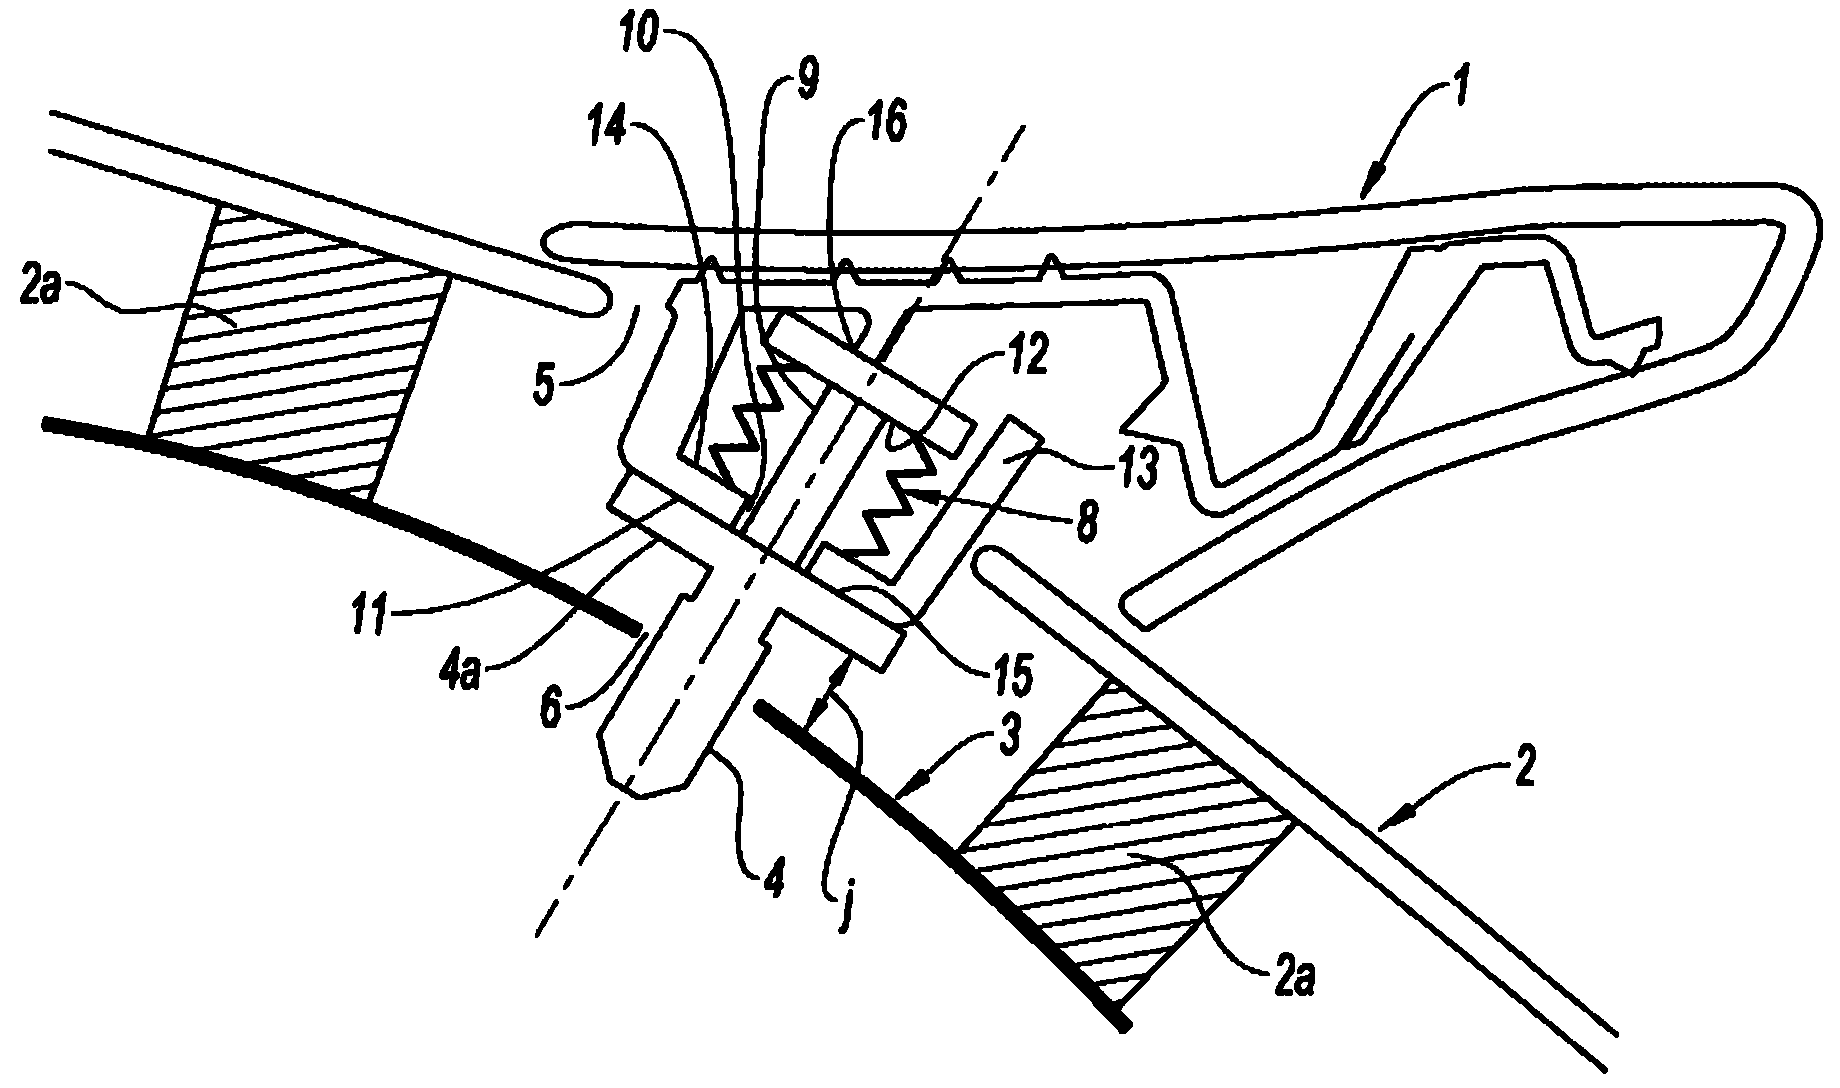 Device for attaching a first part to a second part which is attached to a third part and the assembly of three parts, in particular, of a motor vehicle